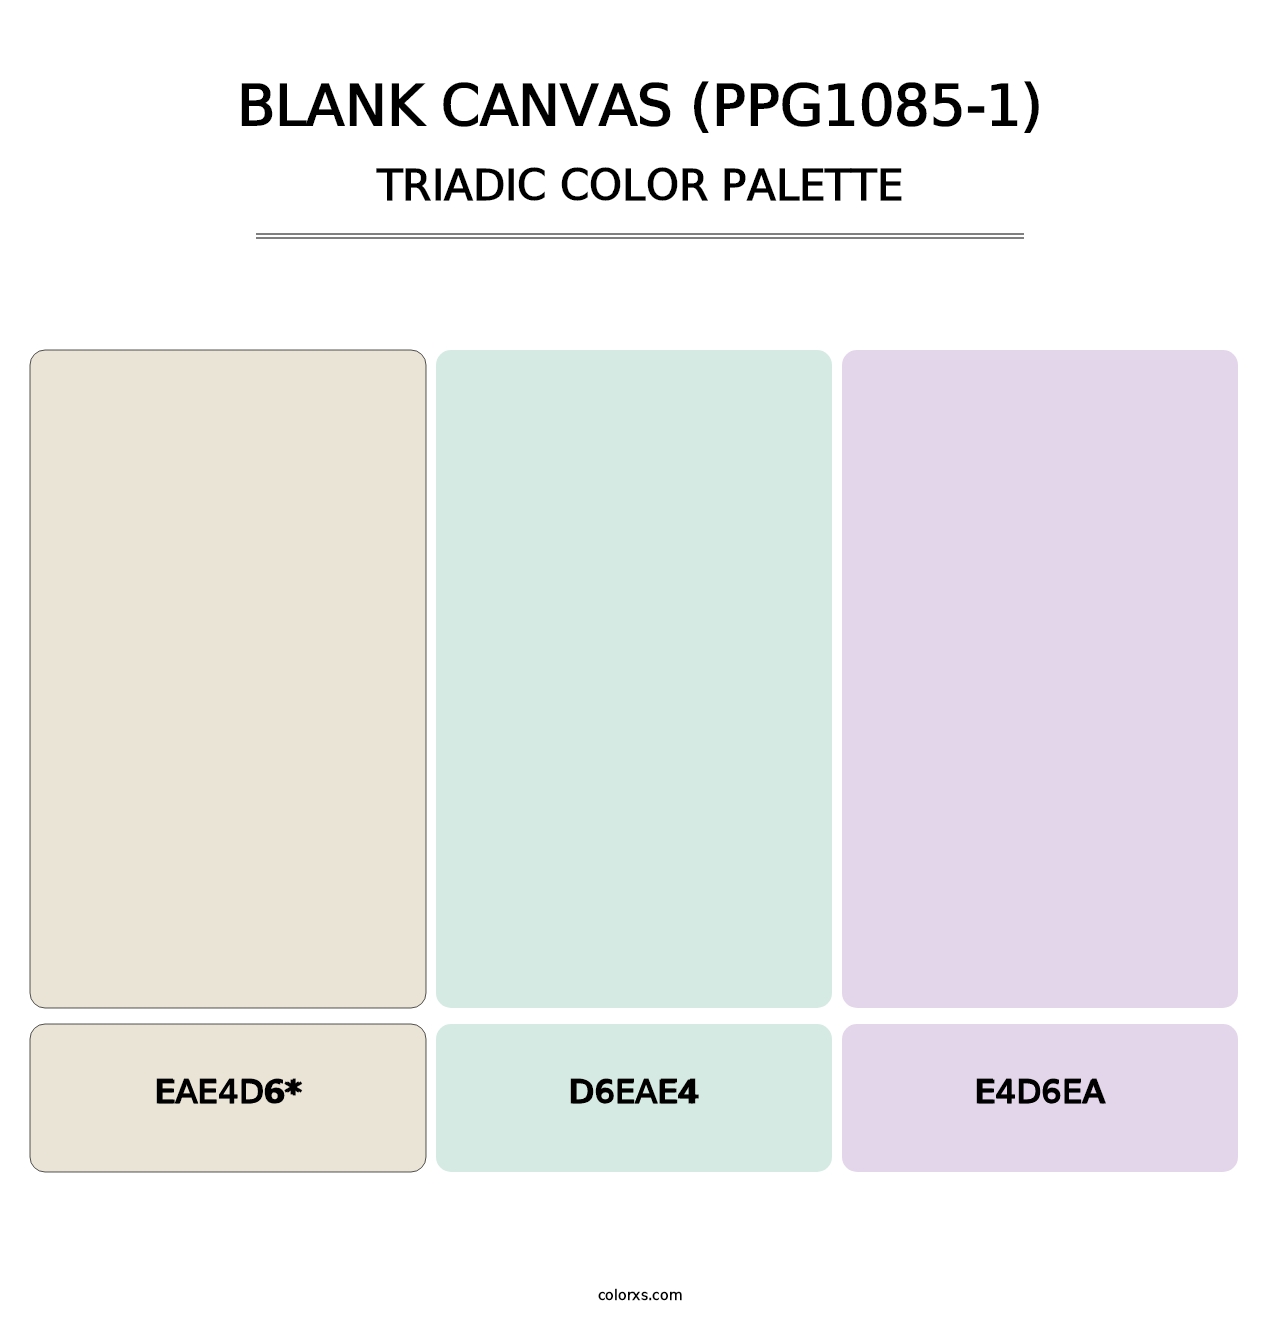 Blank Canvas (PPG1085-1) - Triadic Color Palette